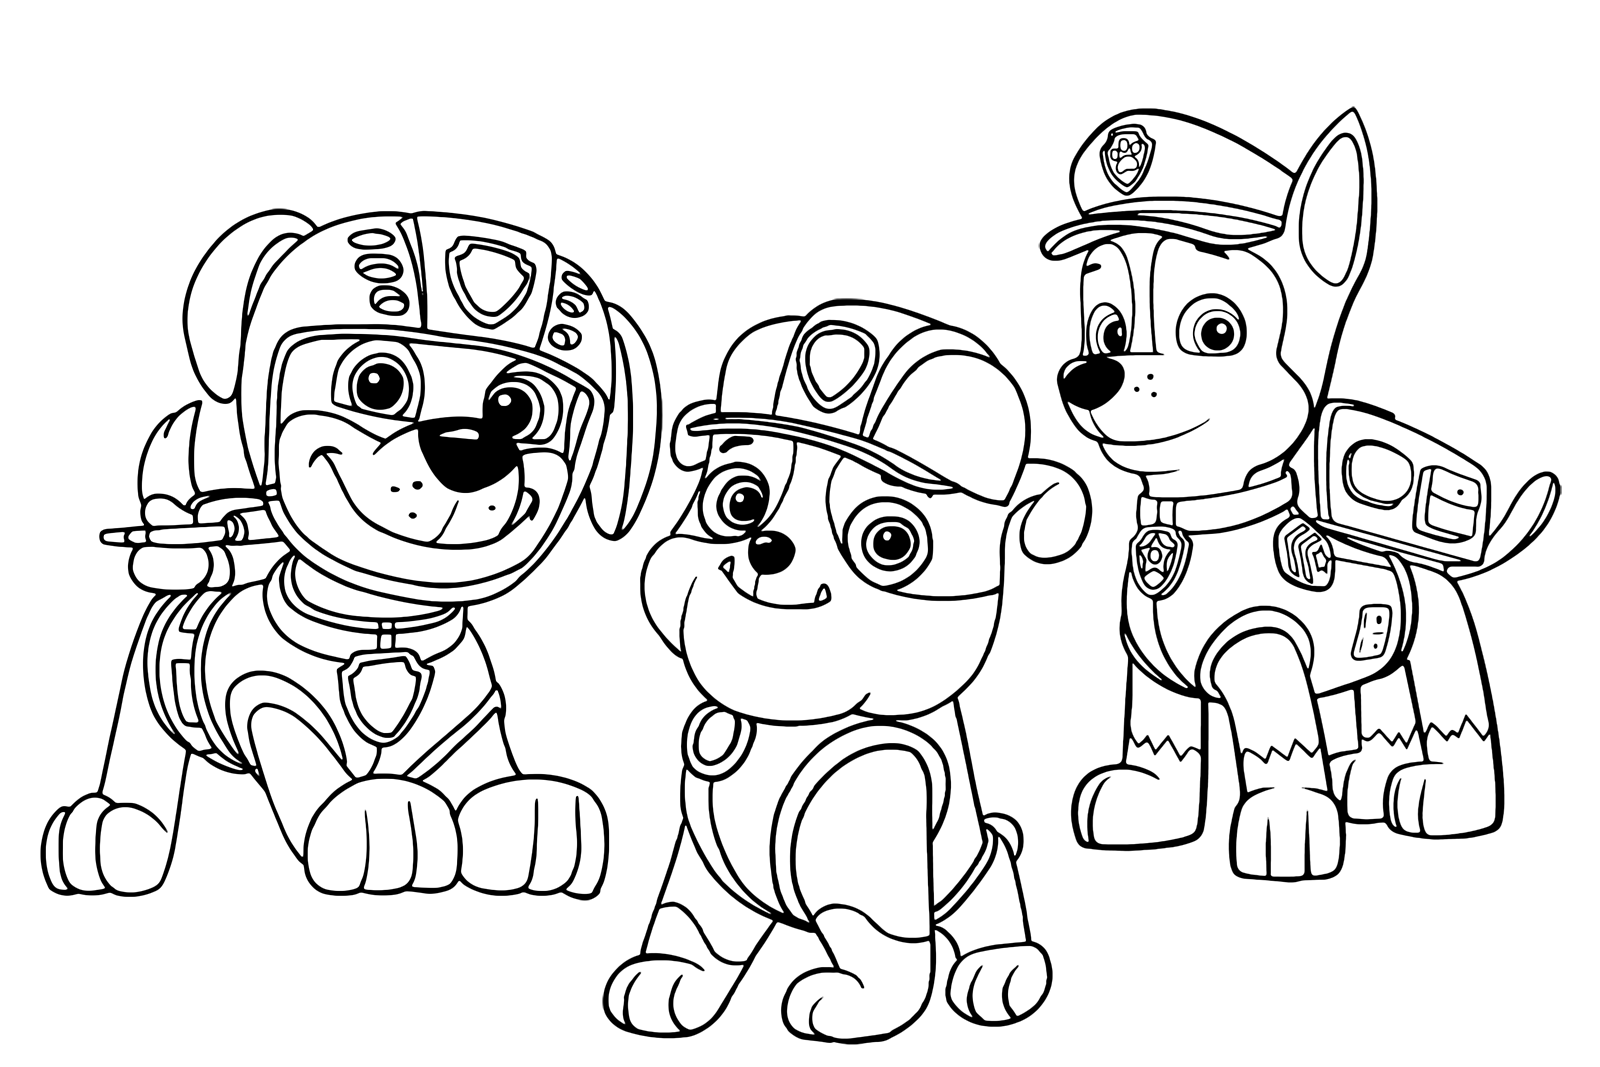 PAW Patrol - Zuma Rubble and Chase together